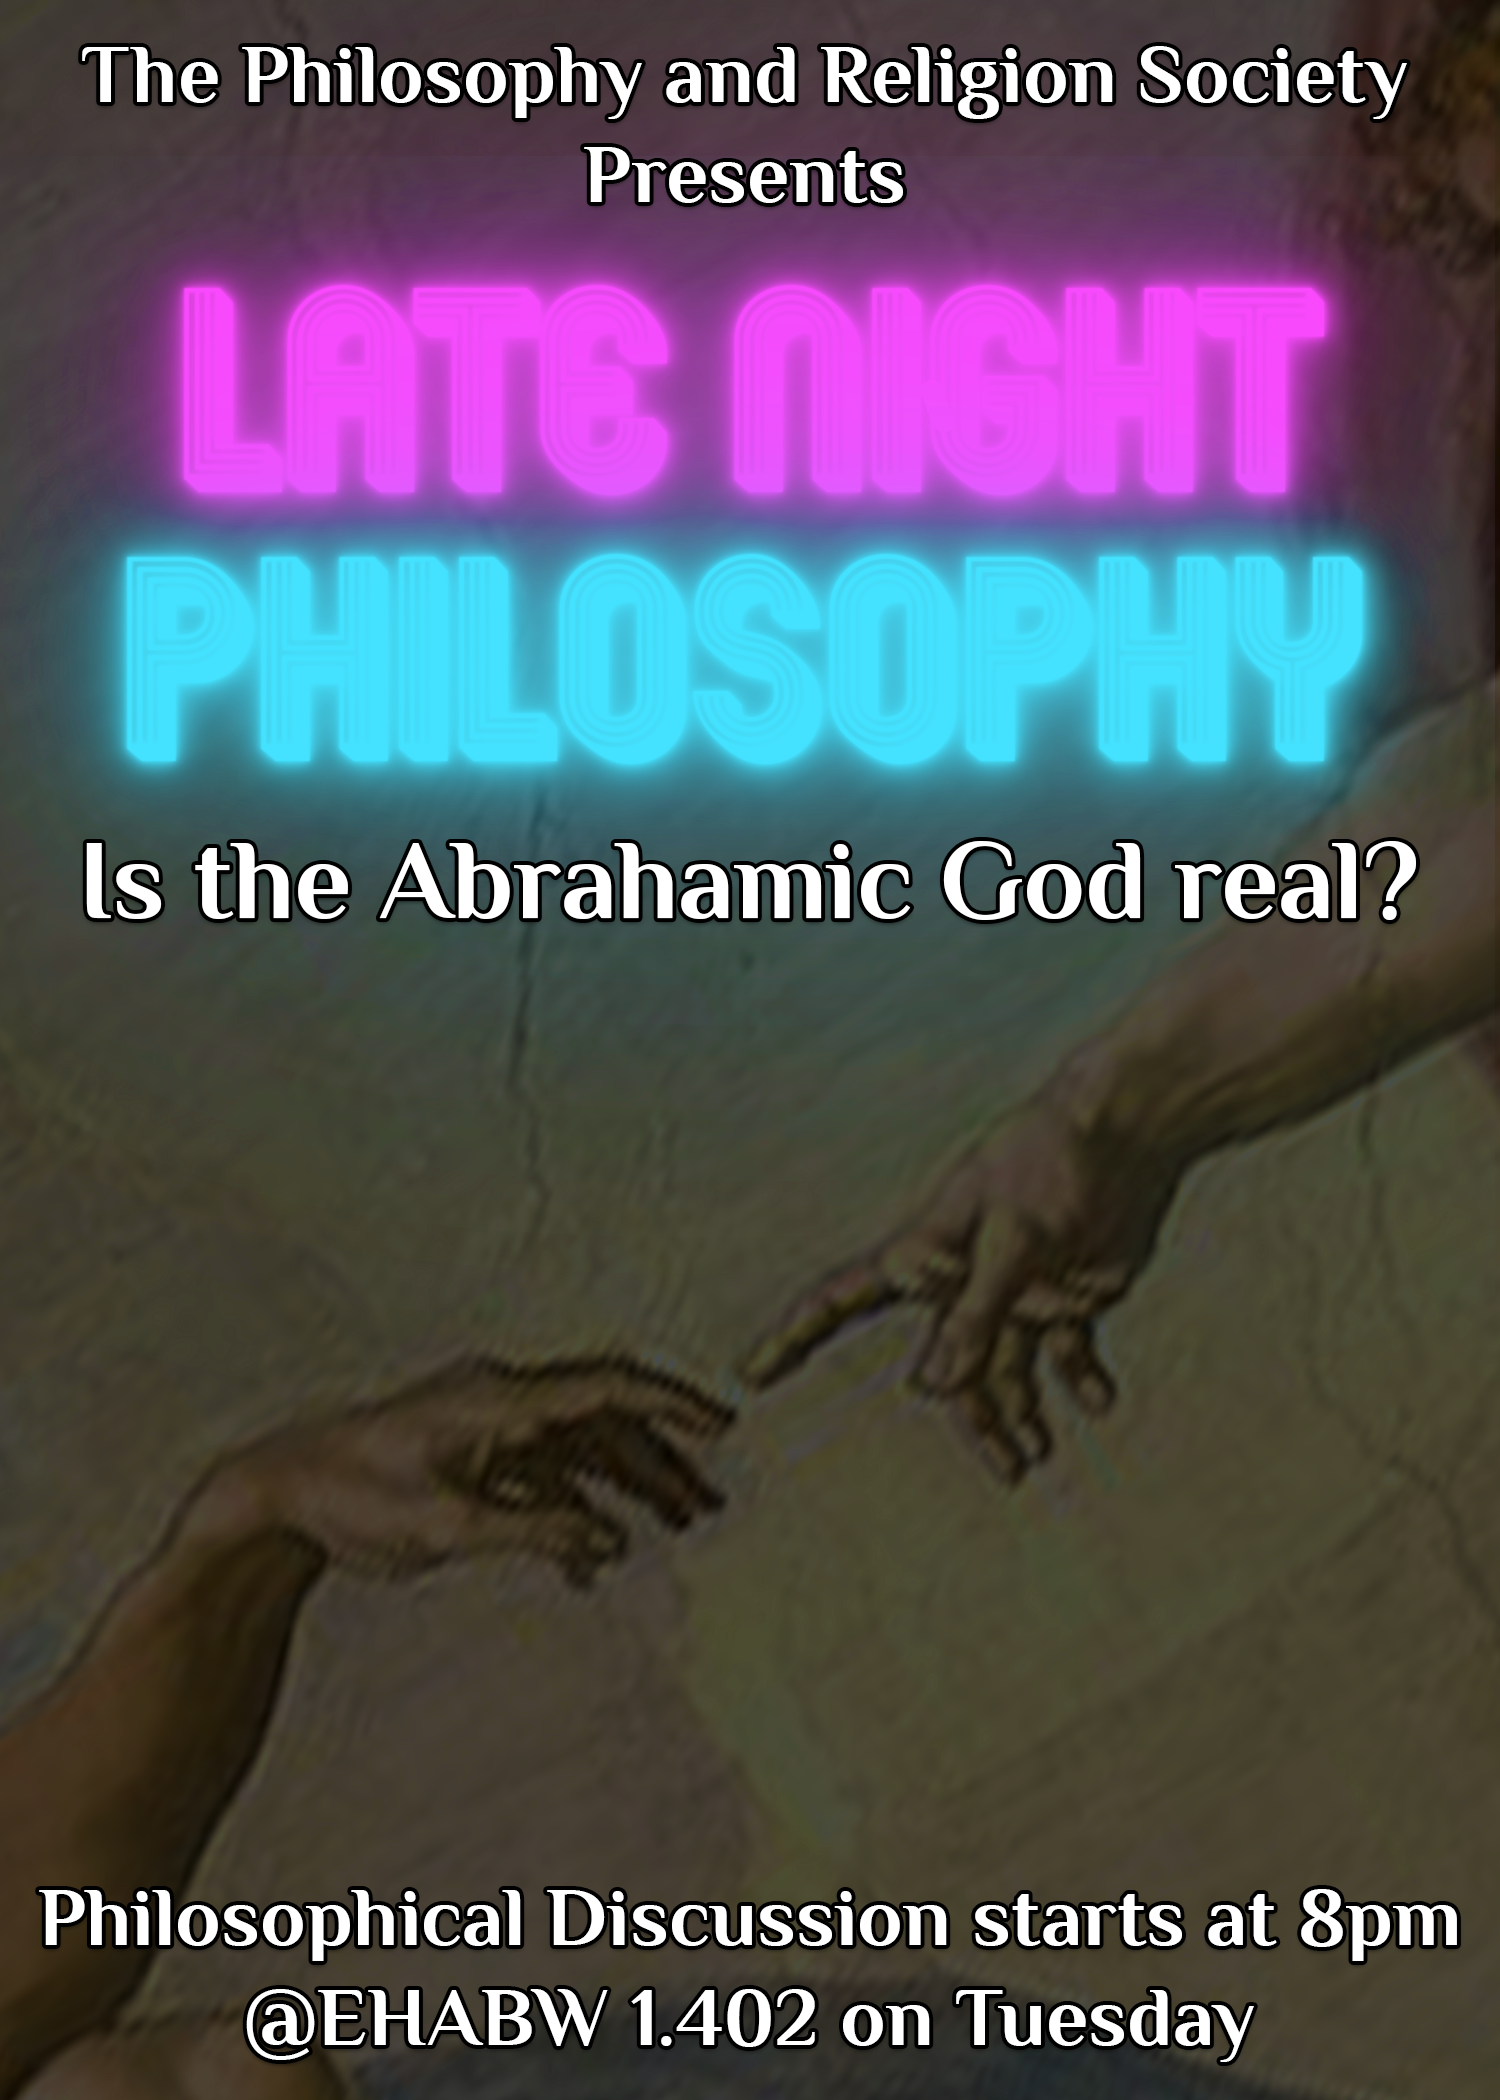 The Philosophy and Religion Society presents Late Night Philosophy